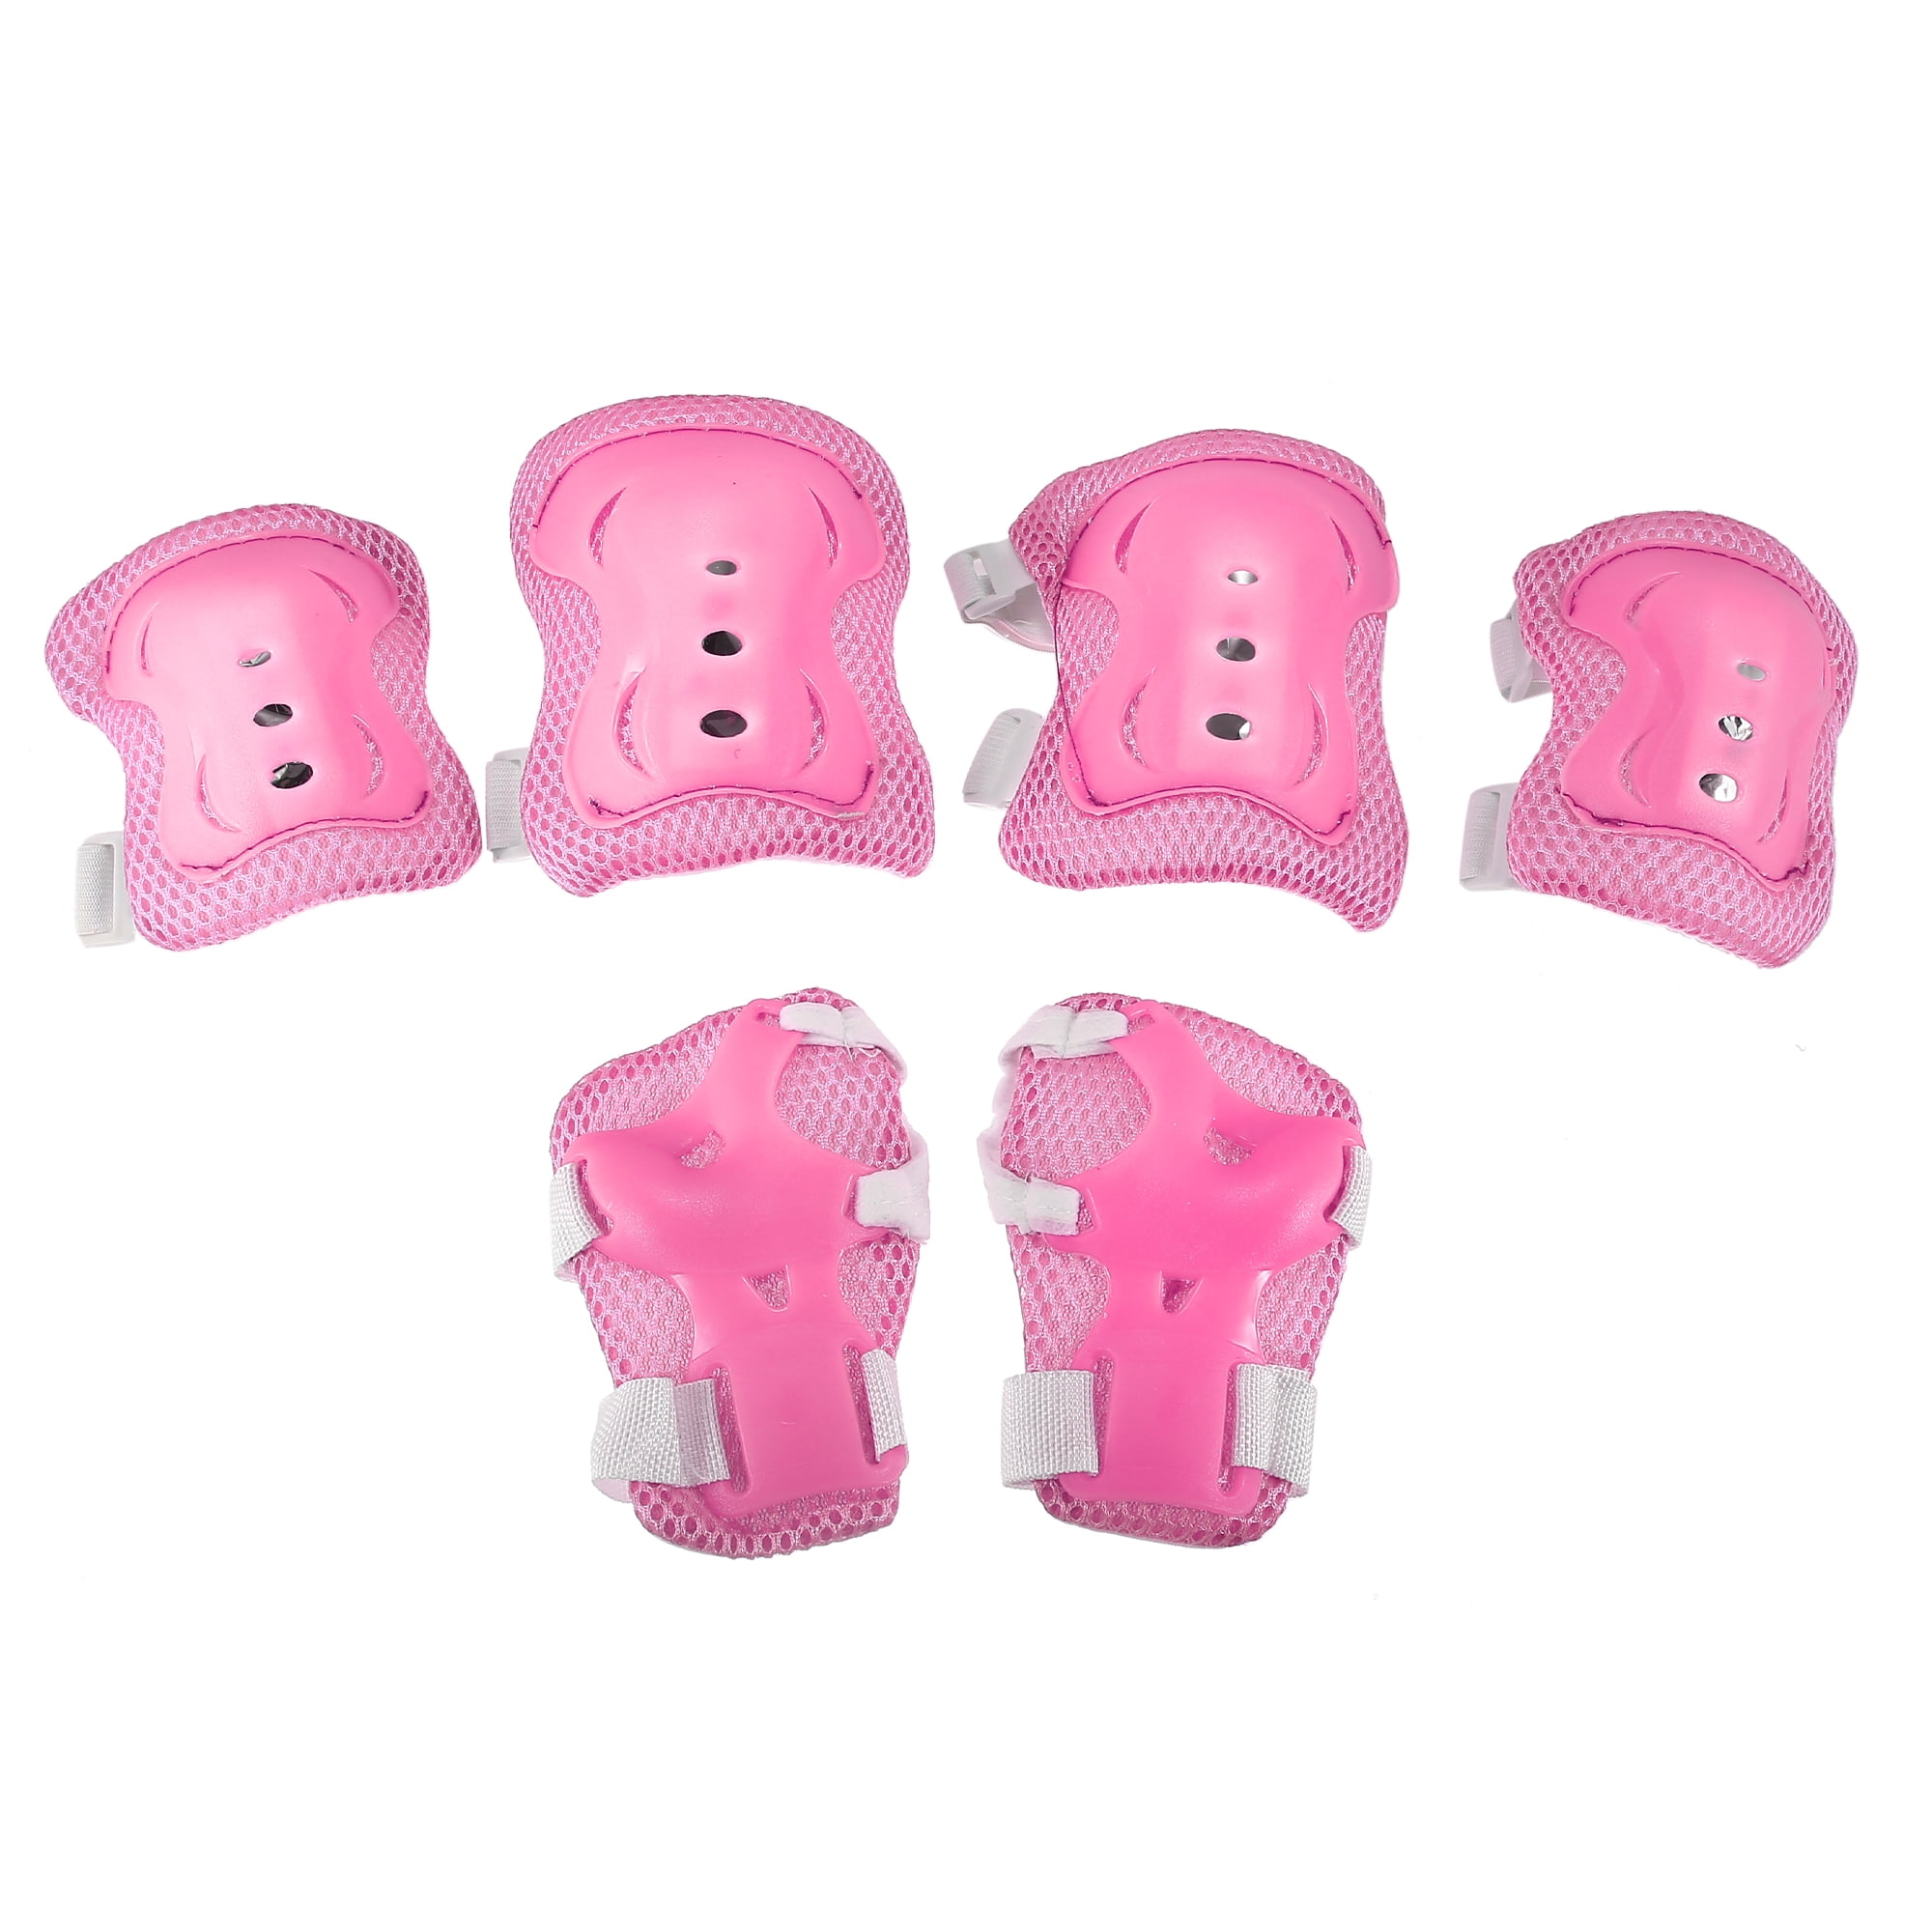 Motoforti 6pcs Pink Wrist Support Guard Elbow Knee Pads Protective Gear ...